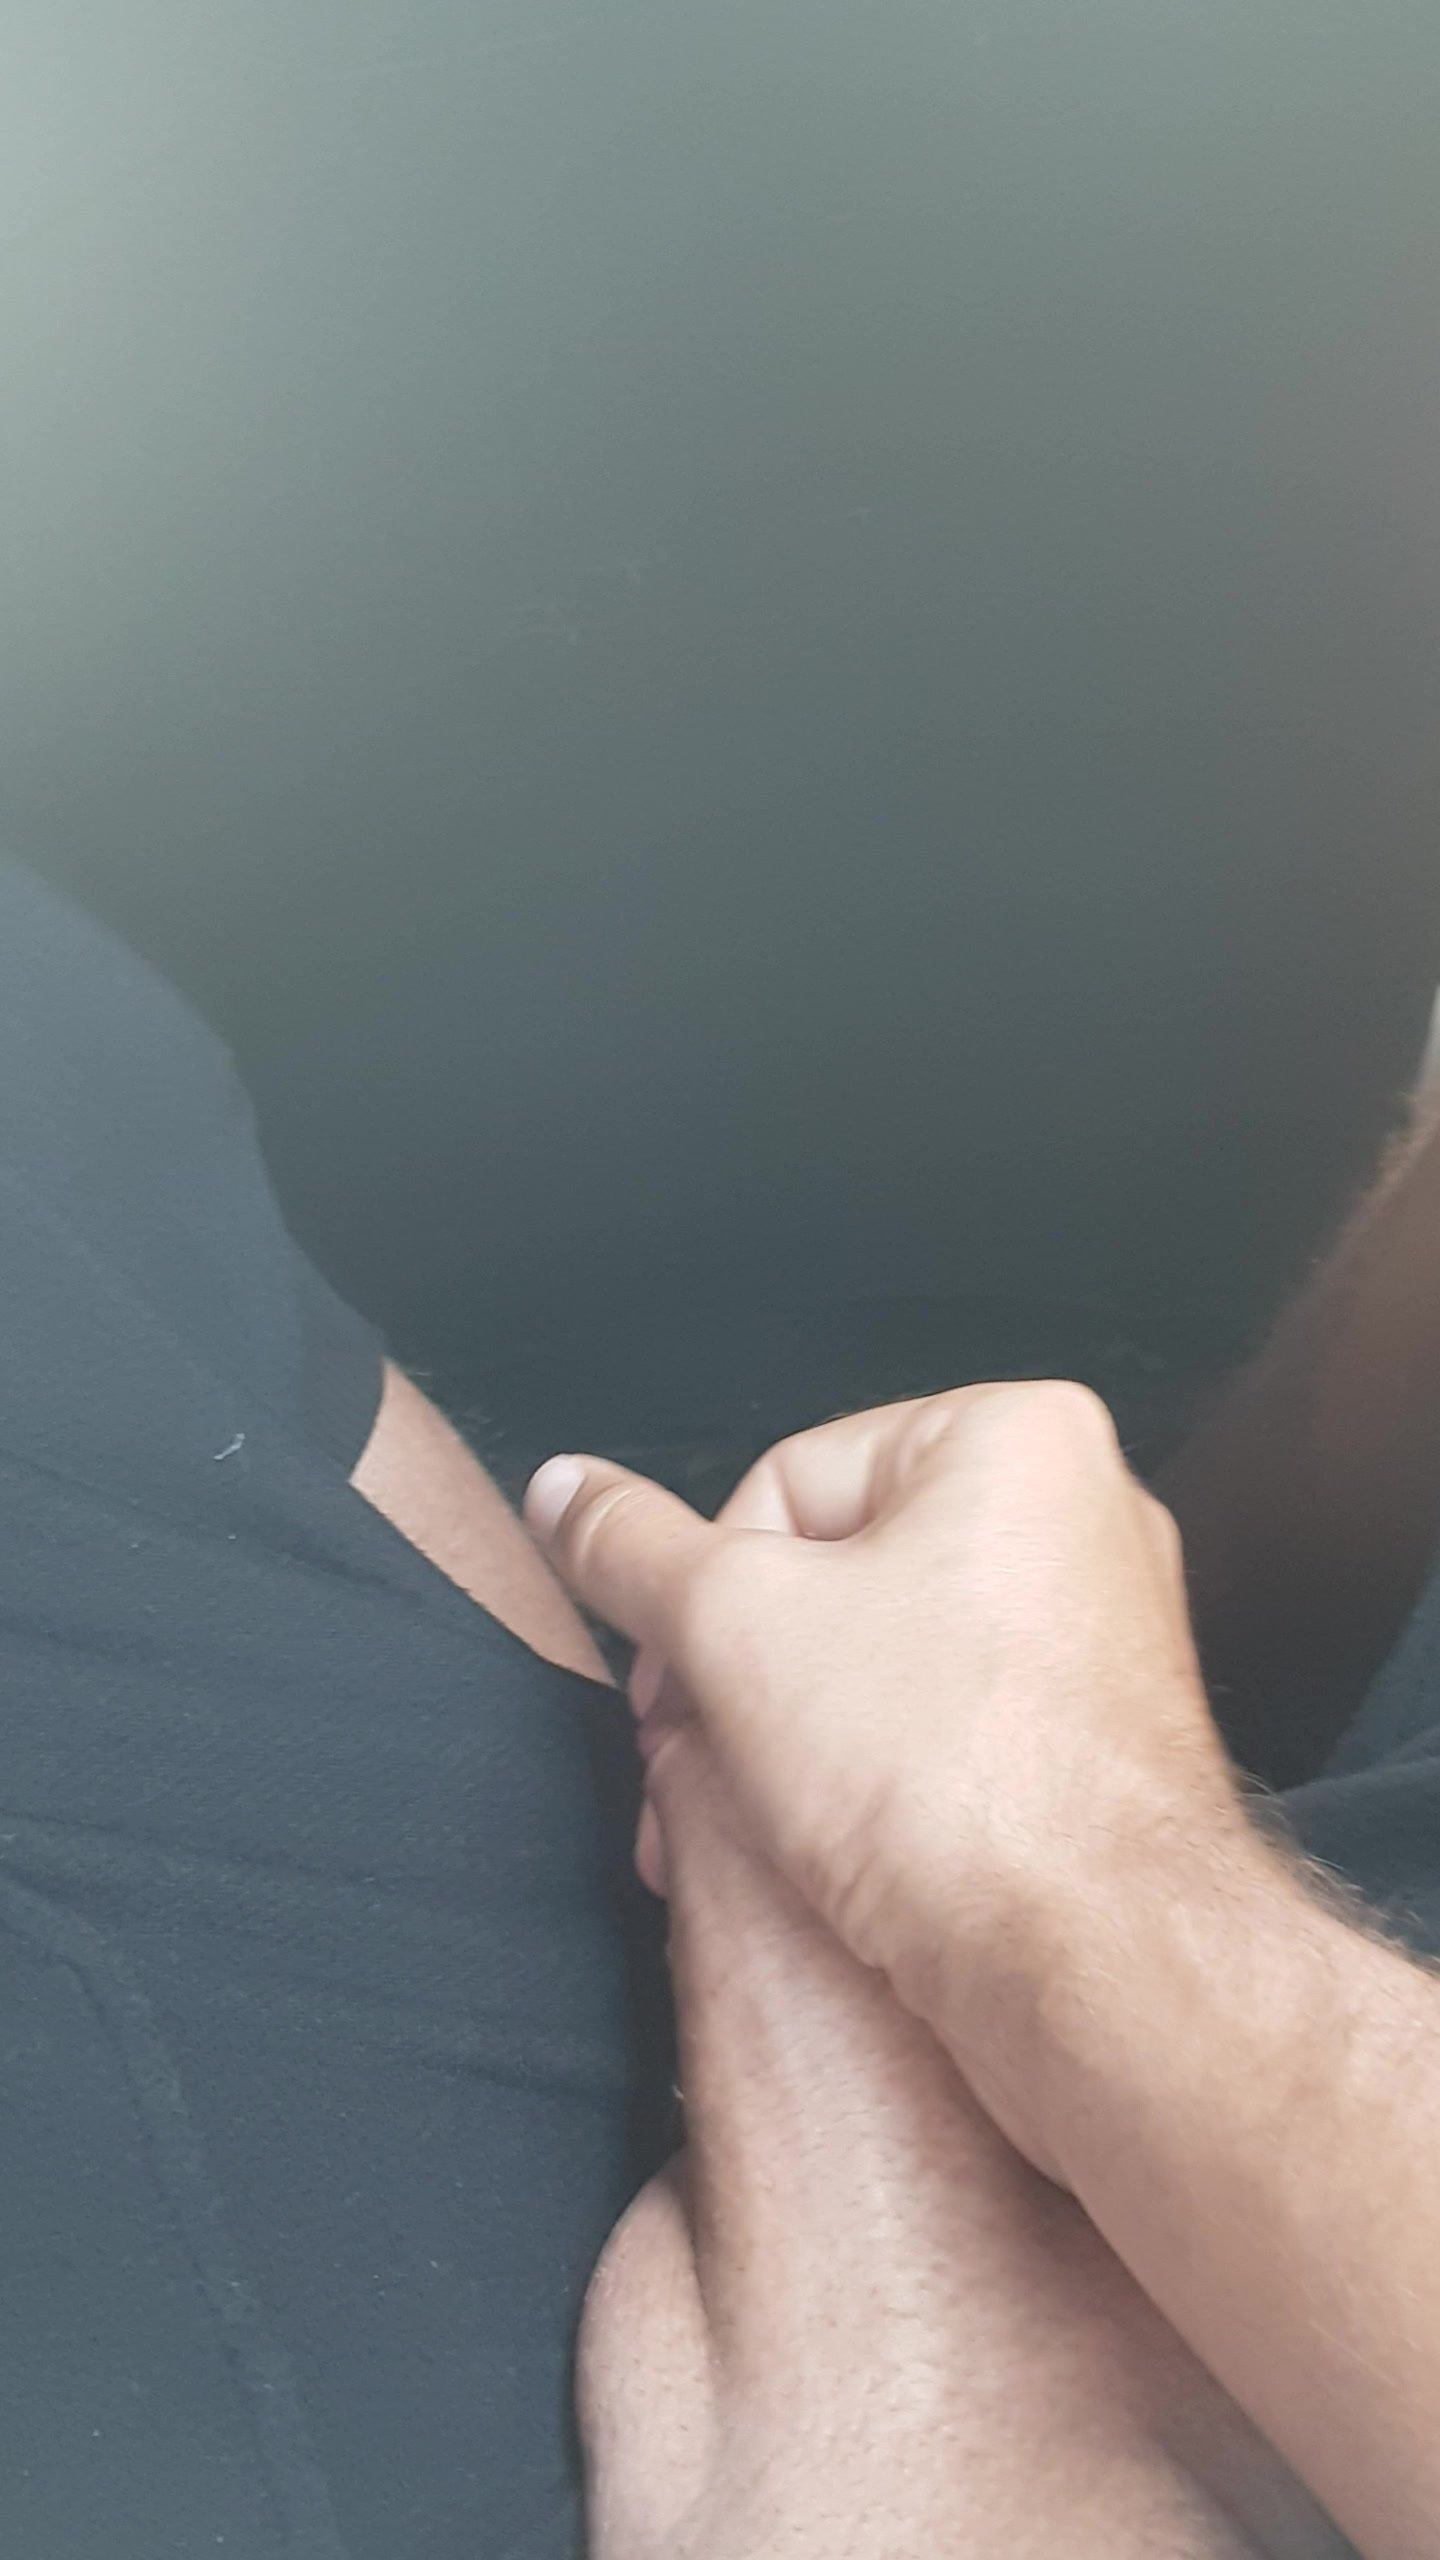 Jerking in the taxi